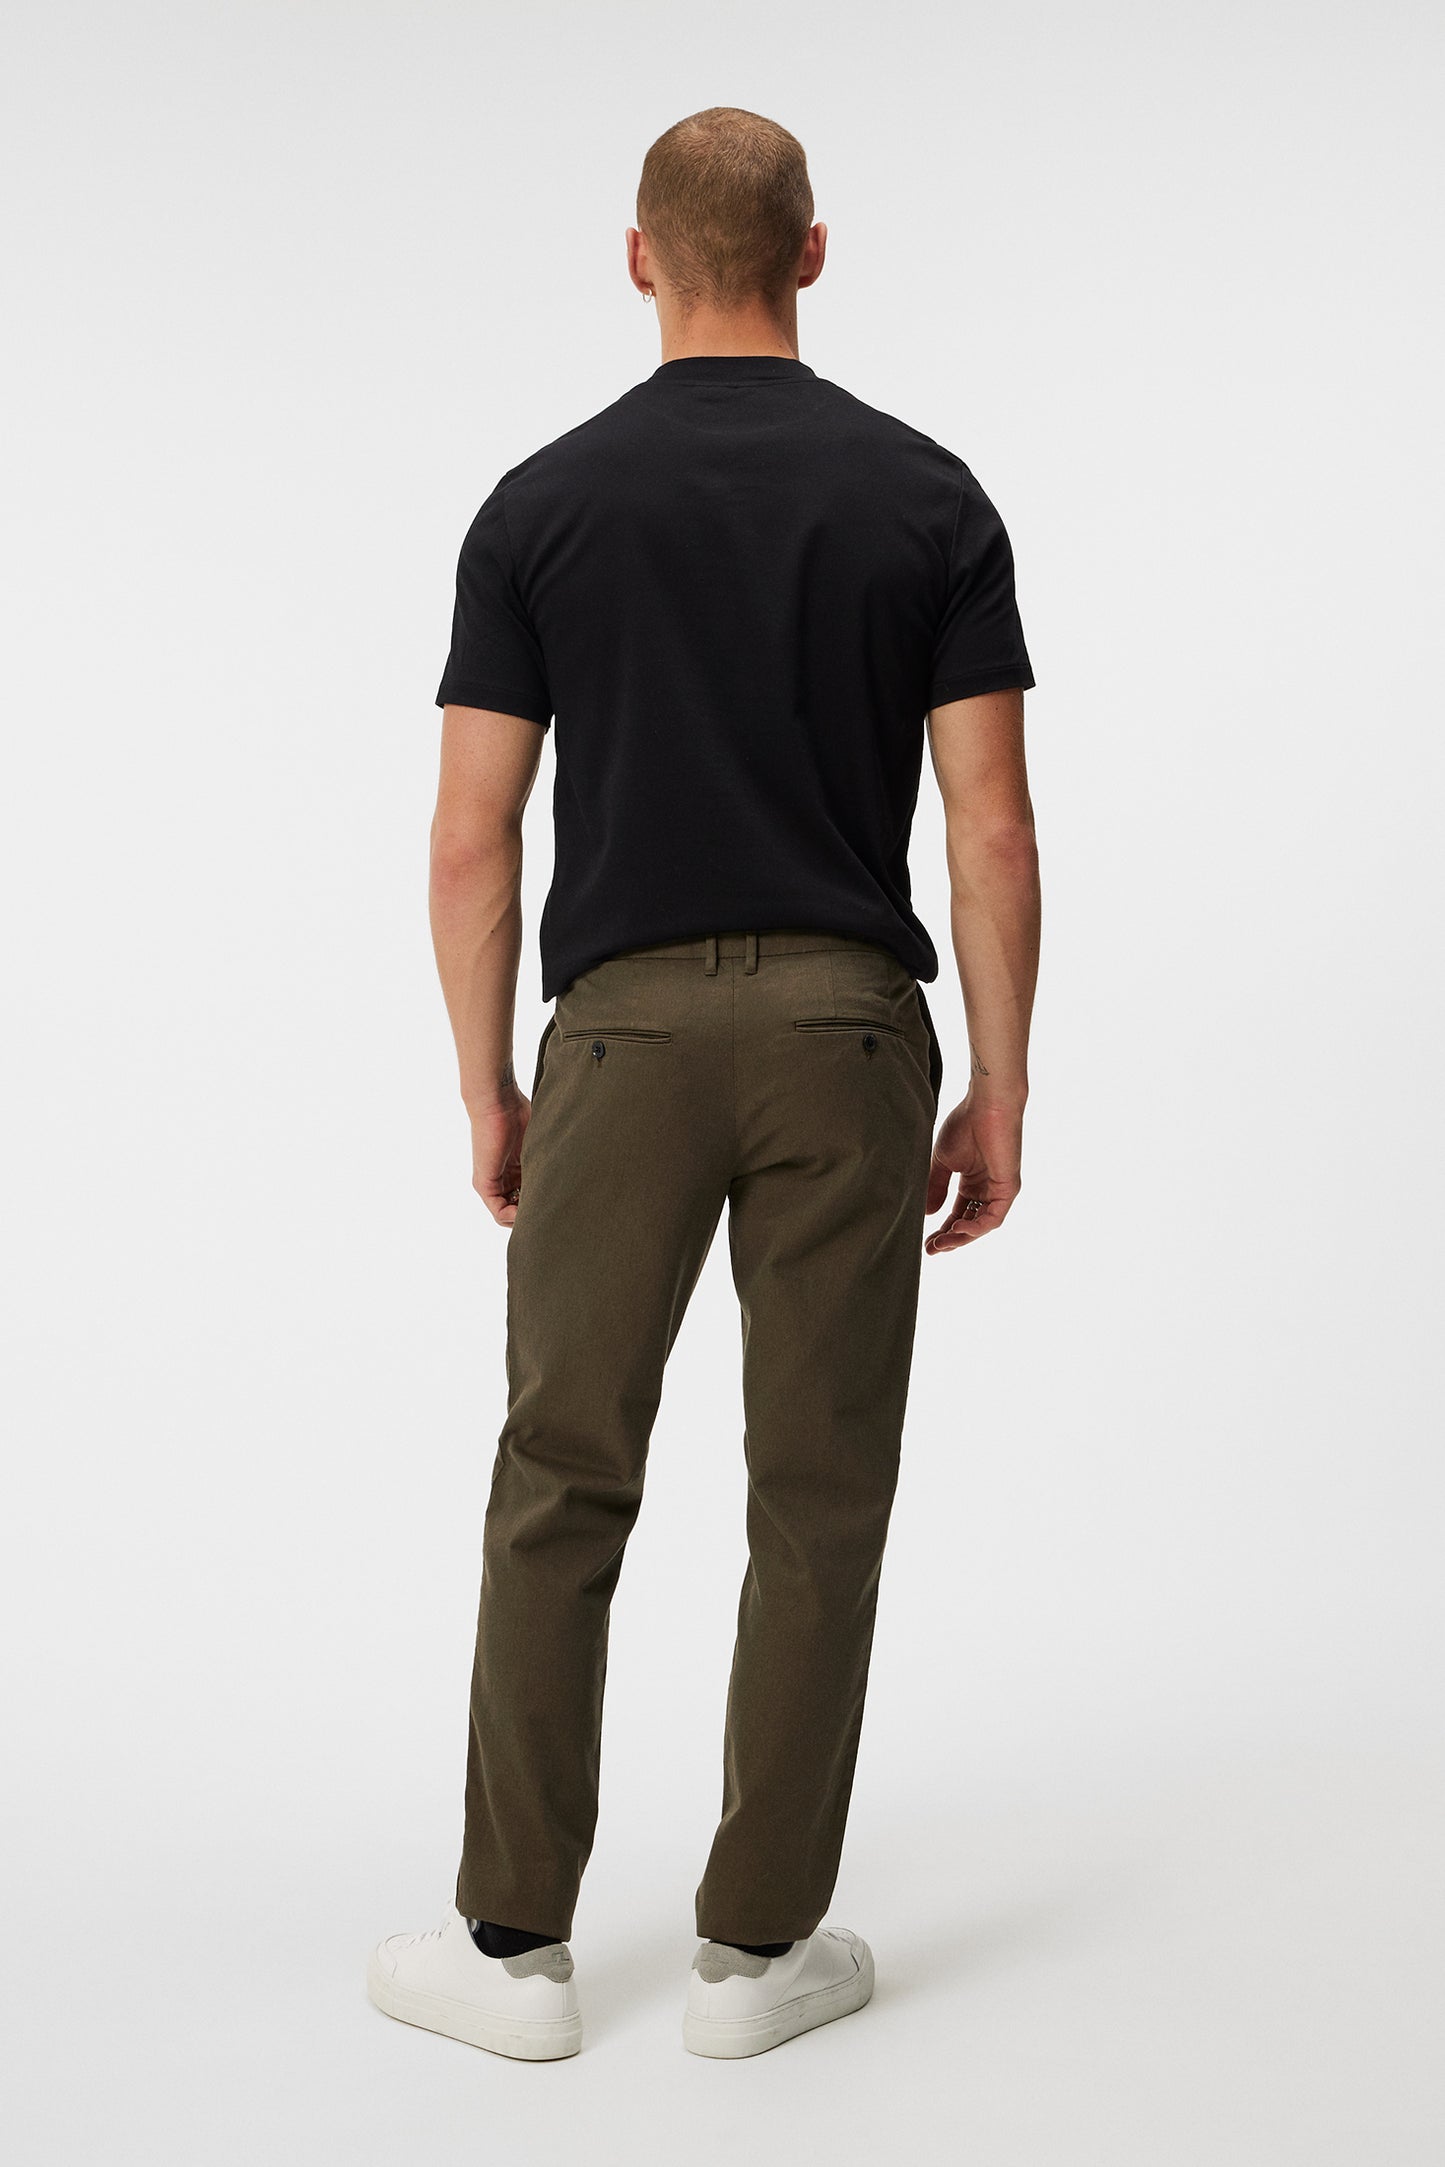 Chaze Flannel Twill Pants / Forest Green